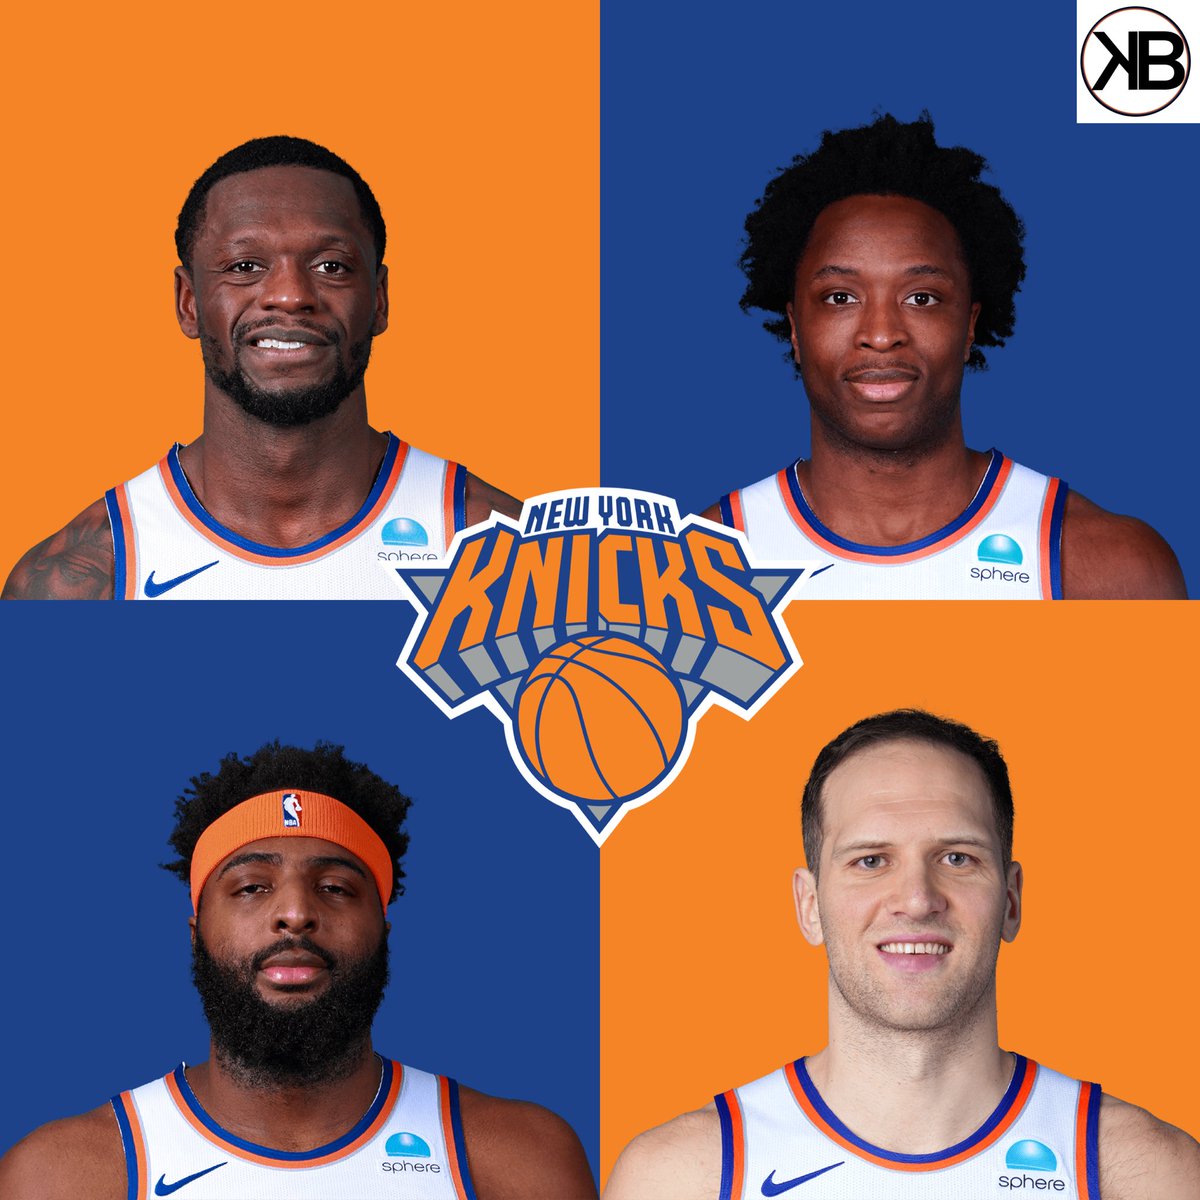 People love to act like the Knicks aren’t missing an All-NBA PF, two DPOY level players (one who is our second option) and a 20 PPG 6th man. Genuinely goofy behavior